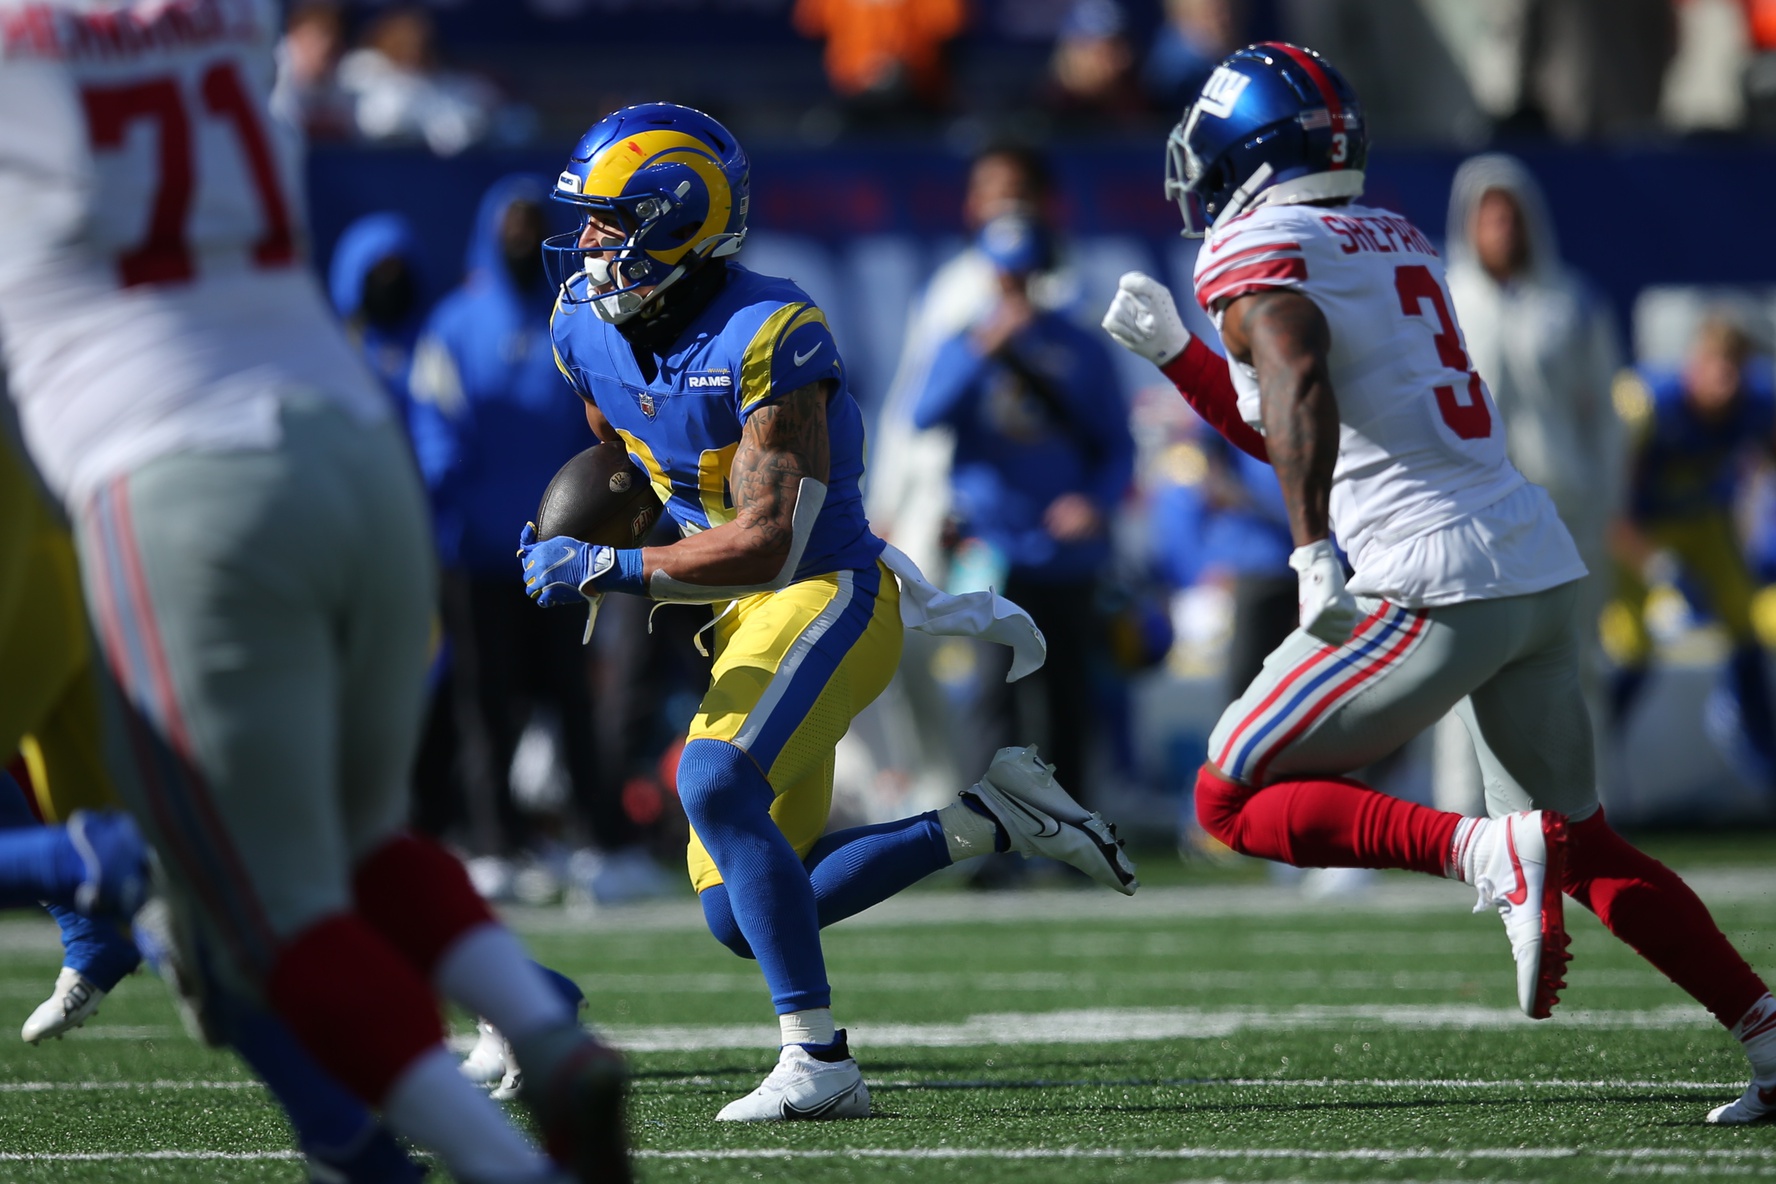 New York Giants fall to Loss Angeles Rams, 38-11, in Week 6